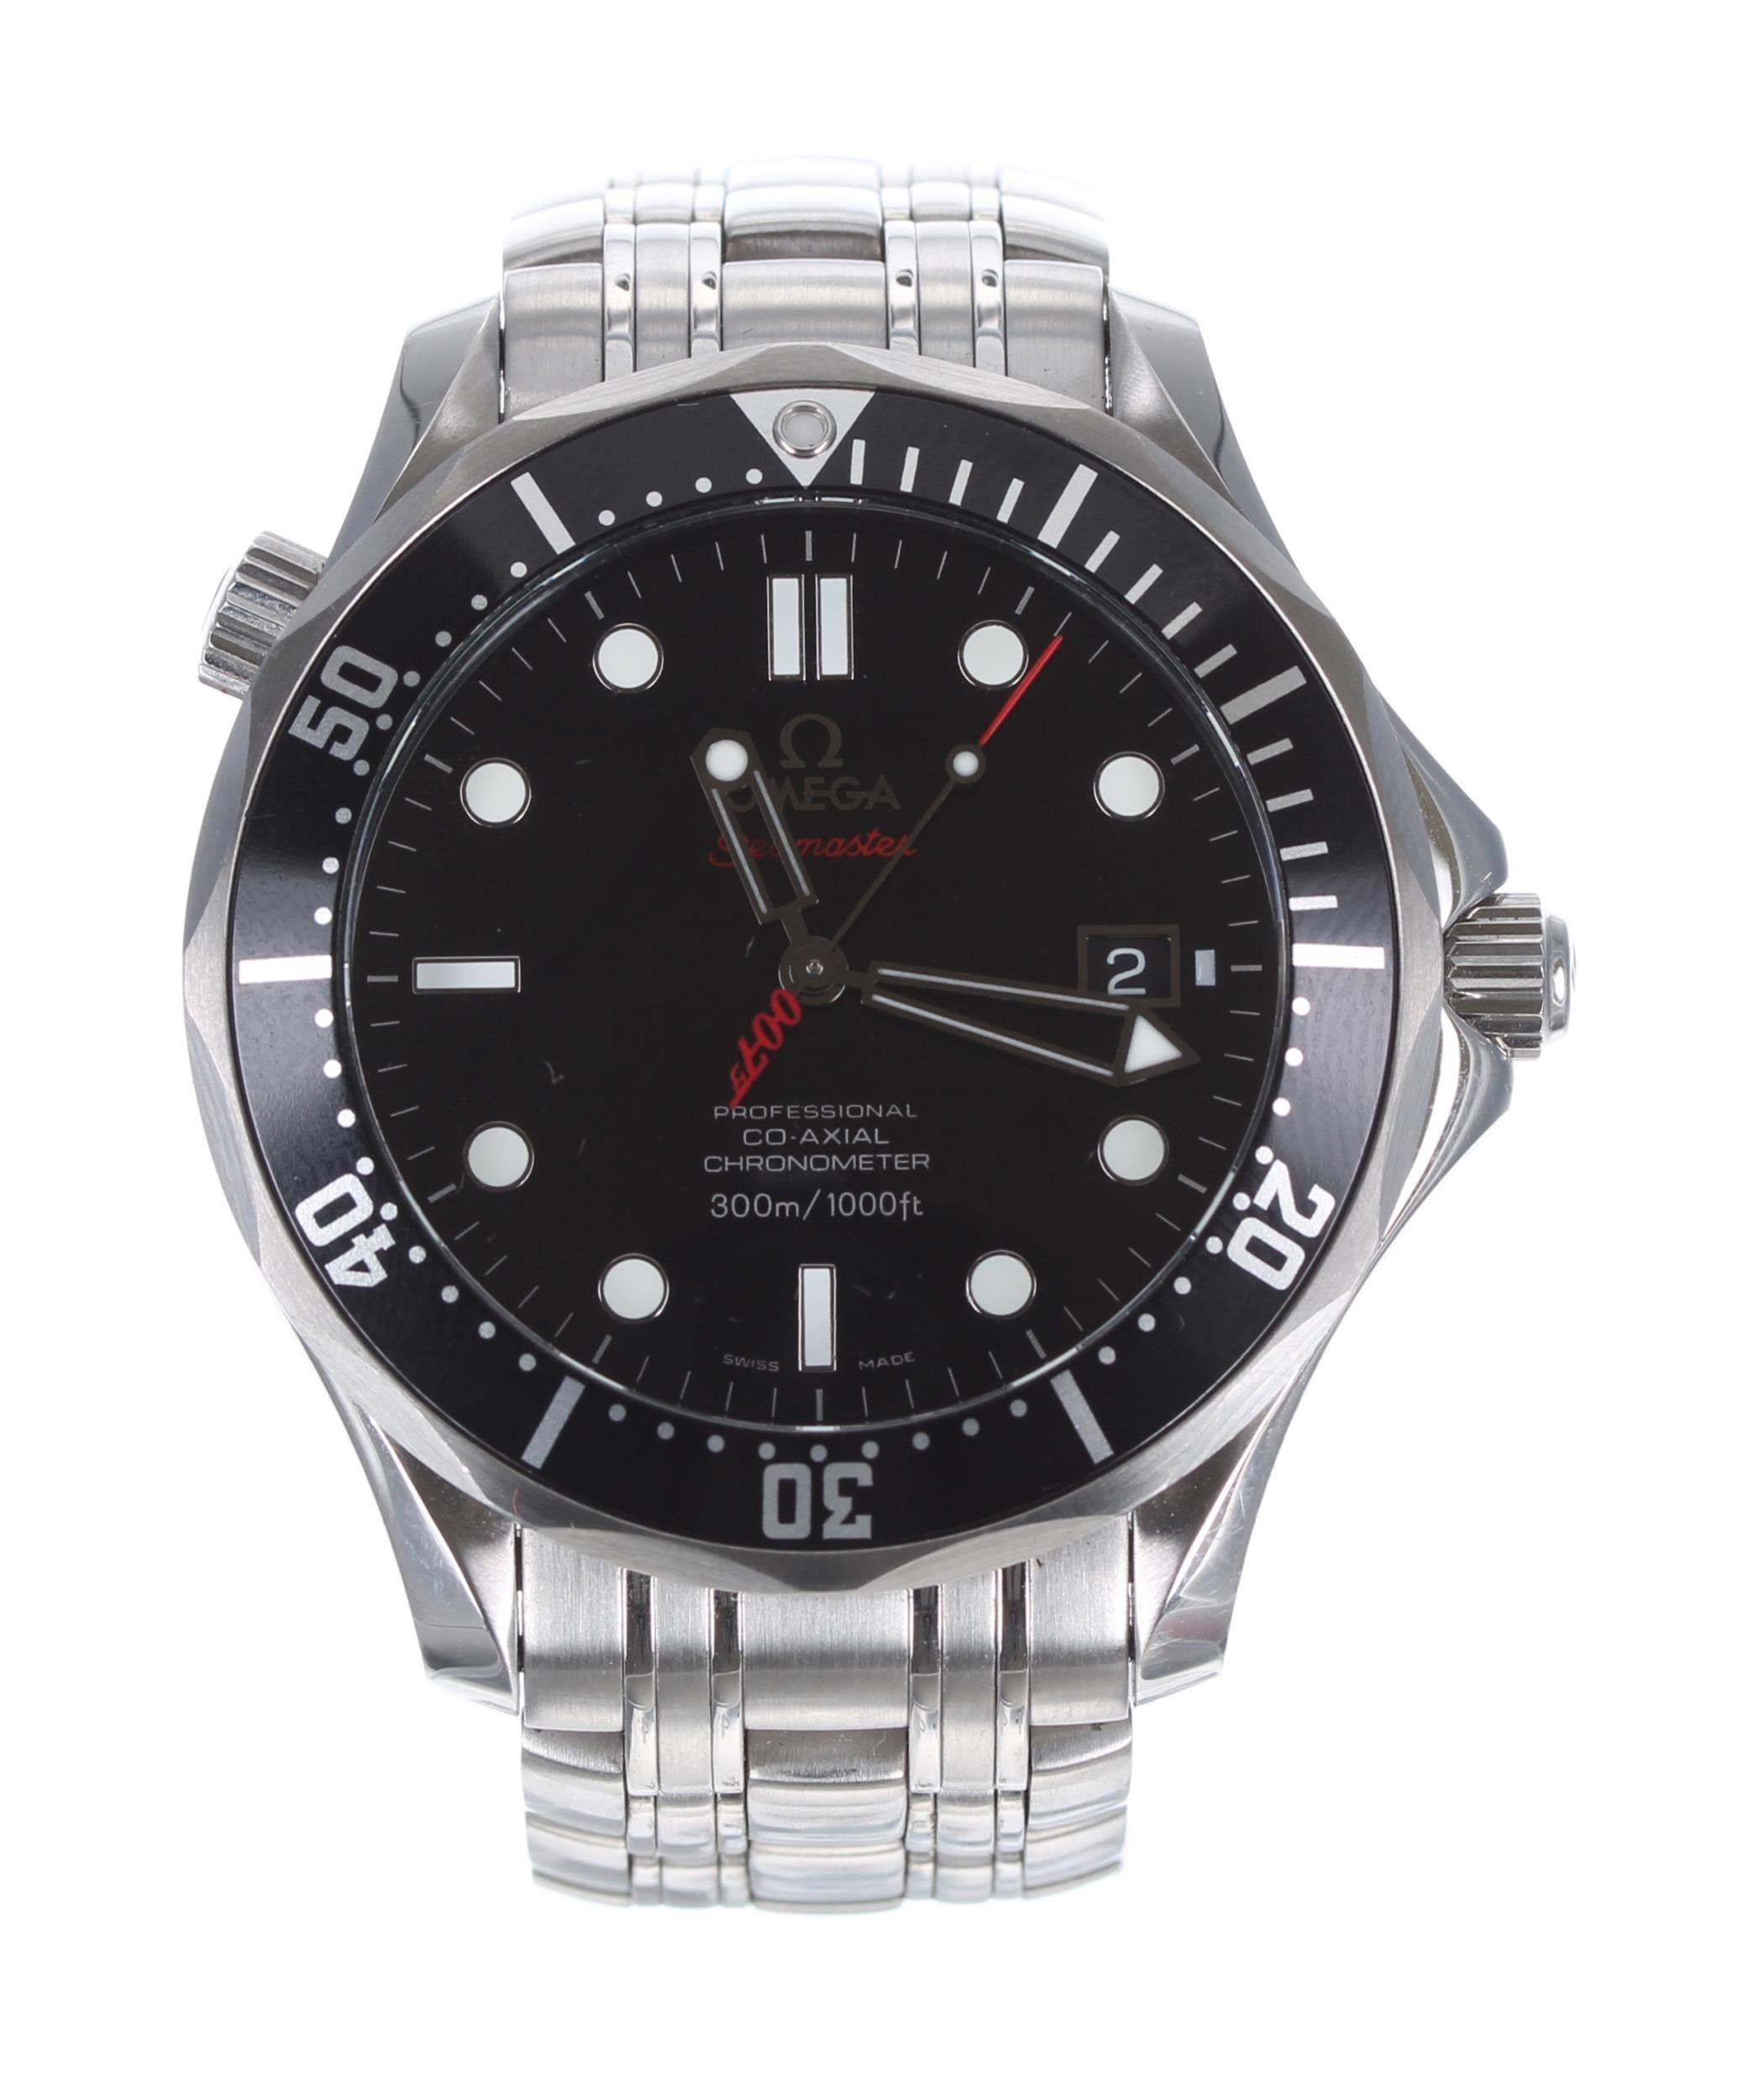 Omega Seamaster '007 James Bond' Professional Co-Axial Chronometer automatic stainless steel - Image 2 of 3